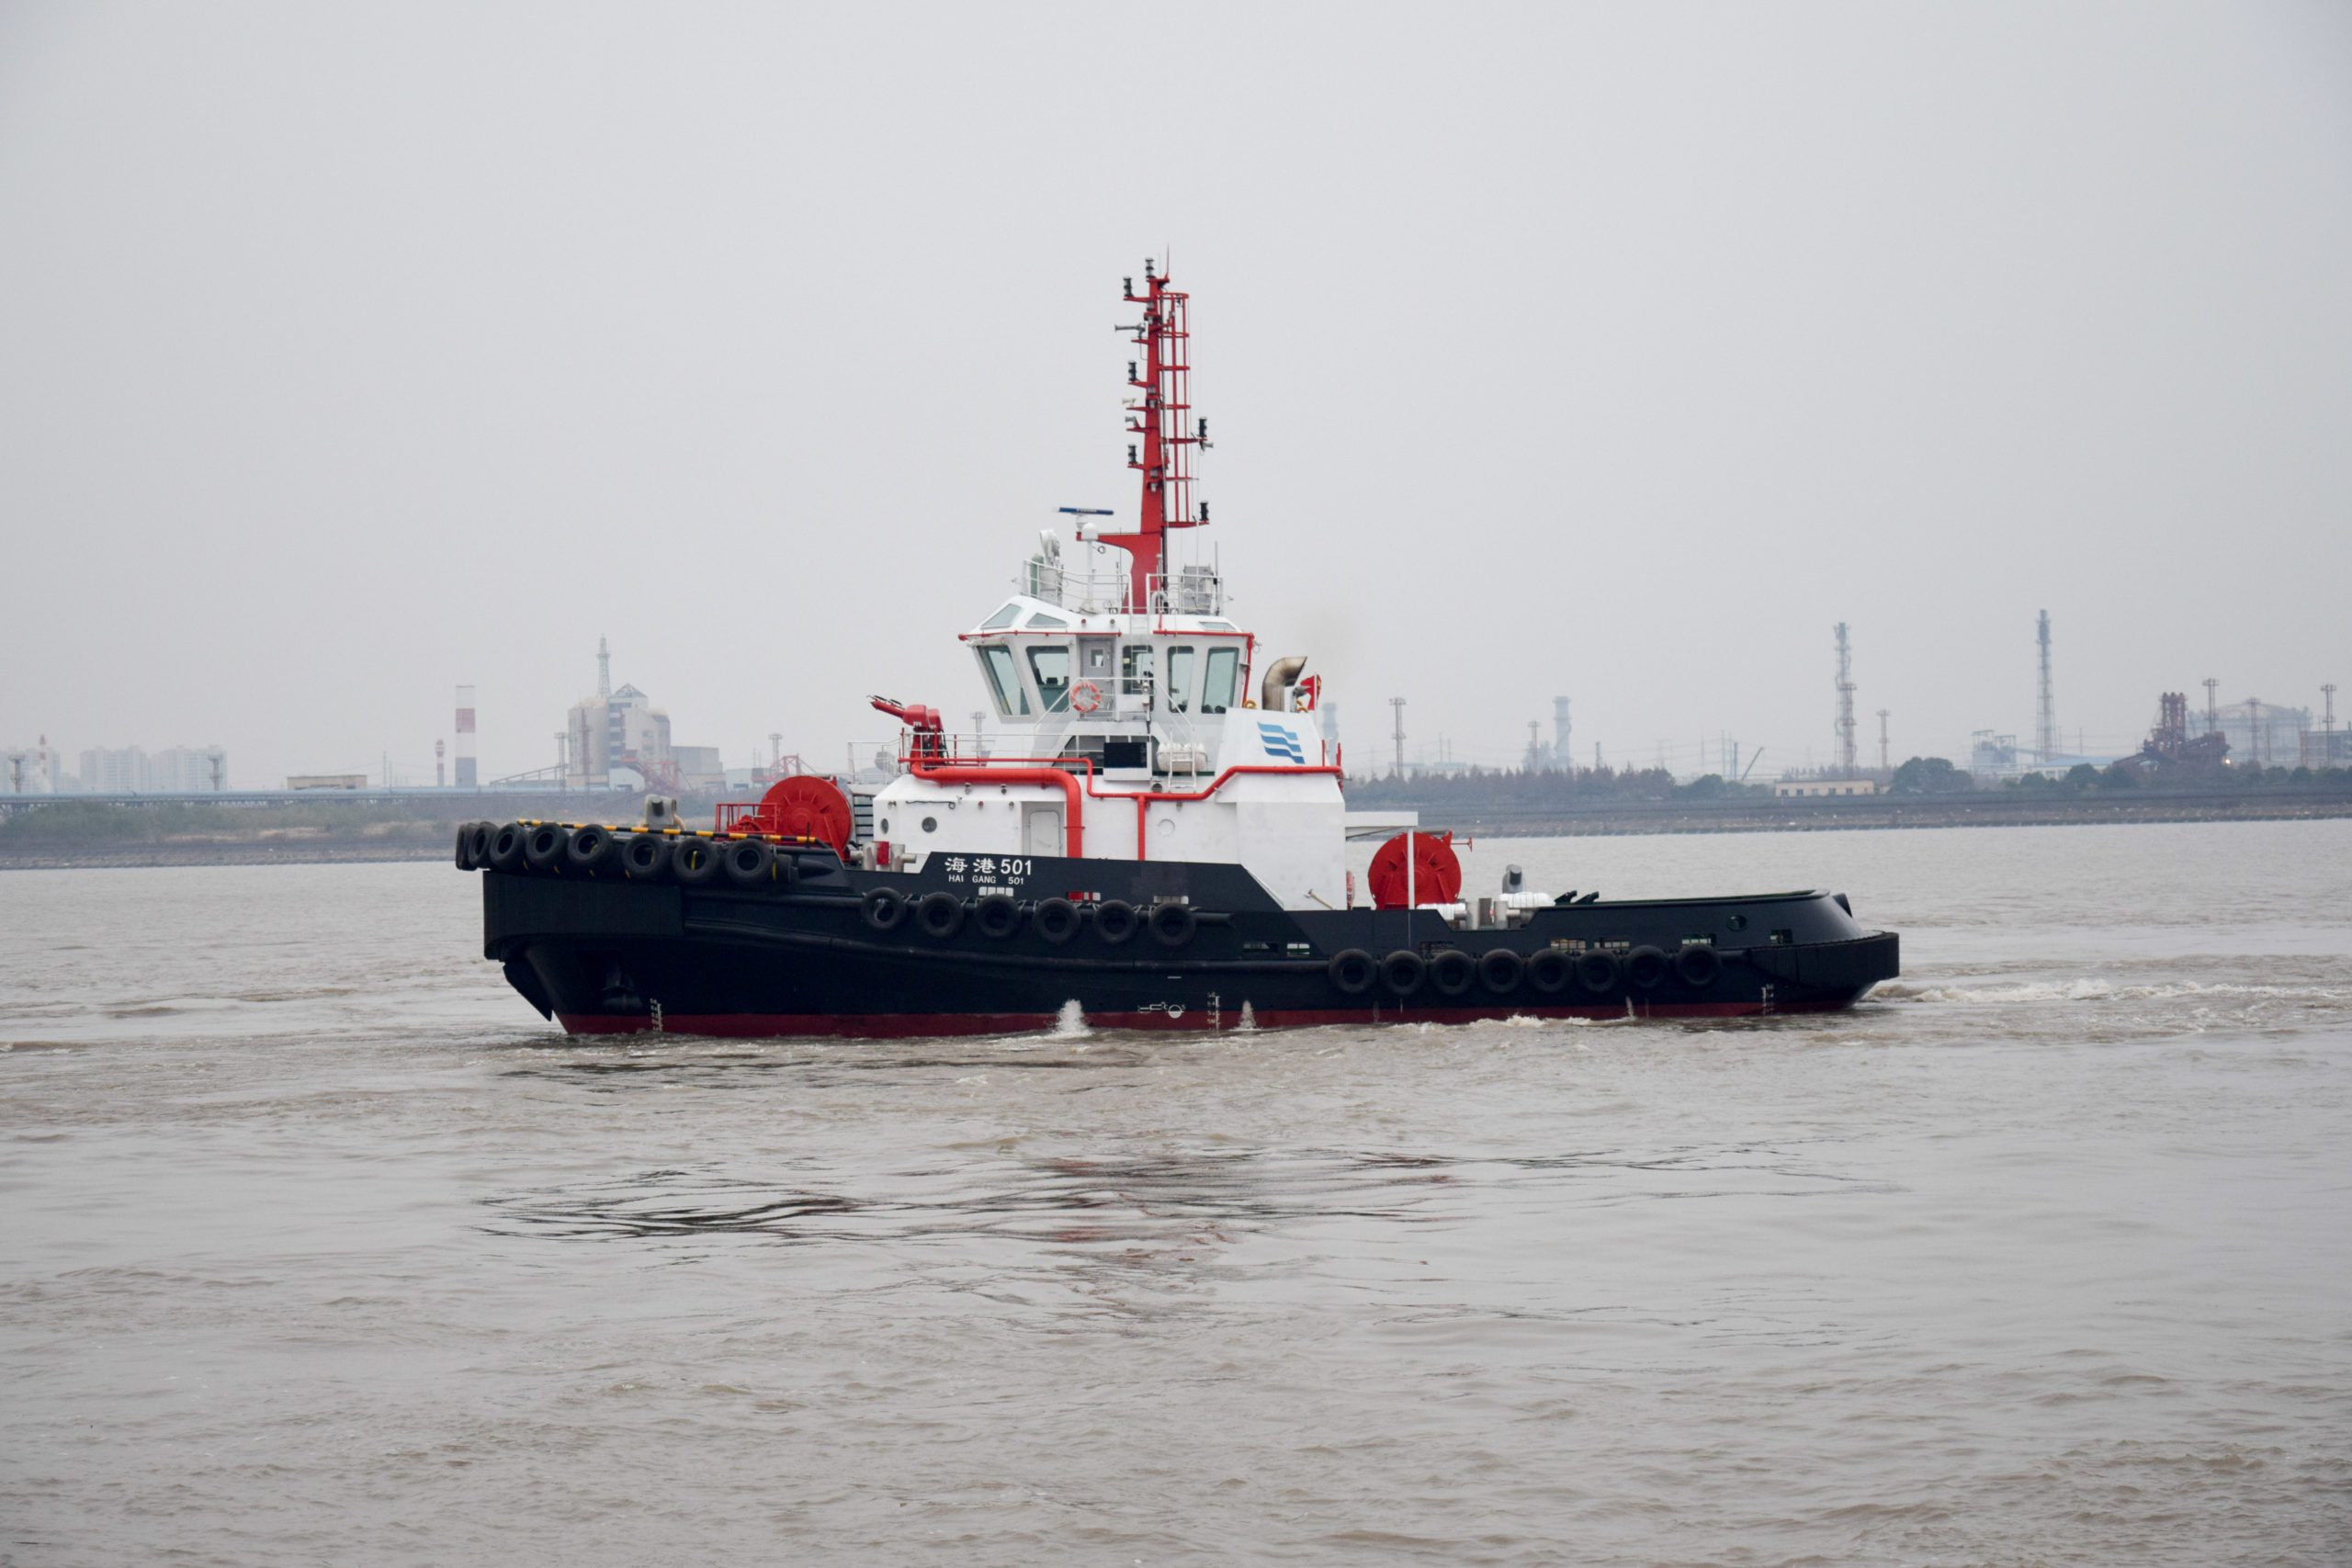 First Robert Allan Ltd. tug to operate in China’s busiest port, the Port of Shanghai